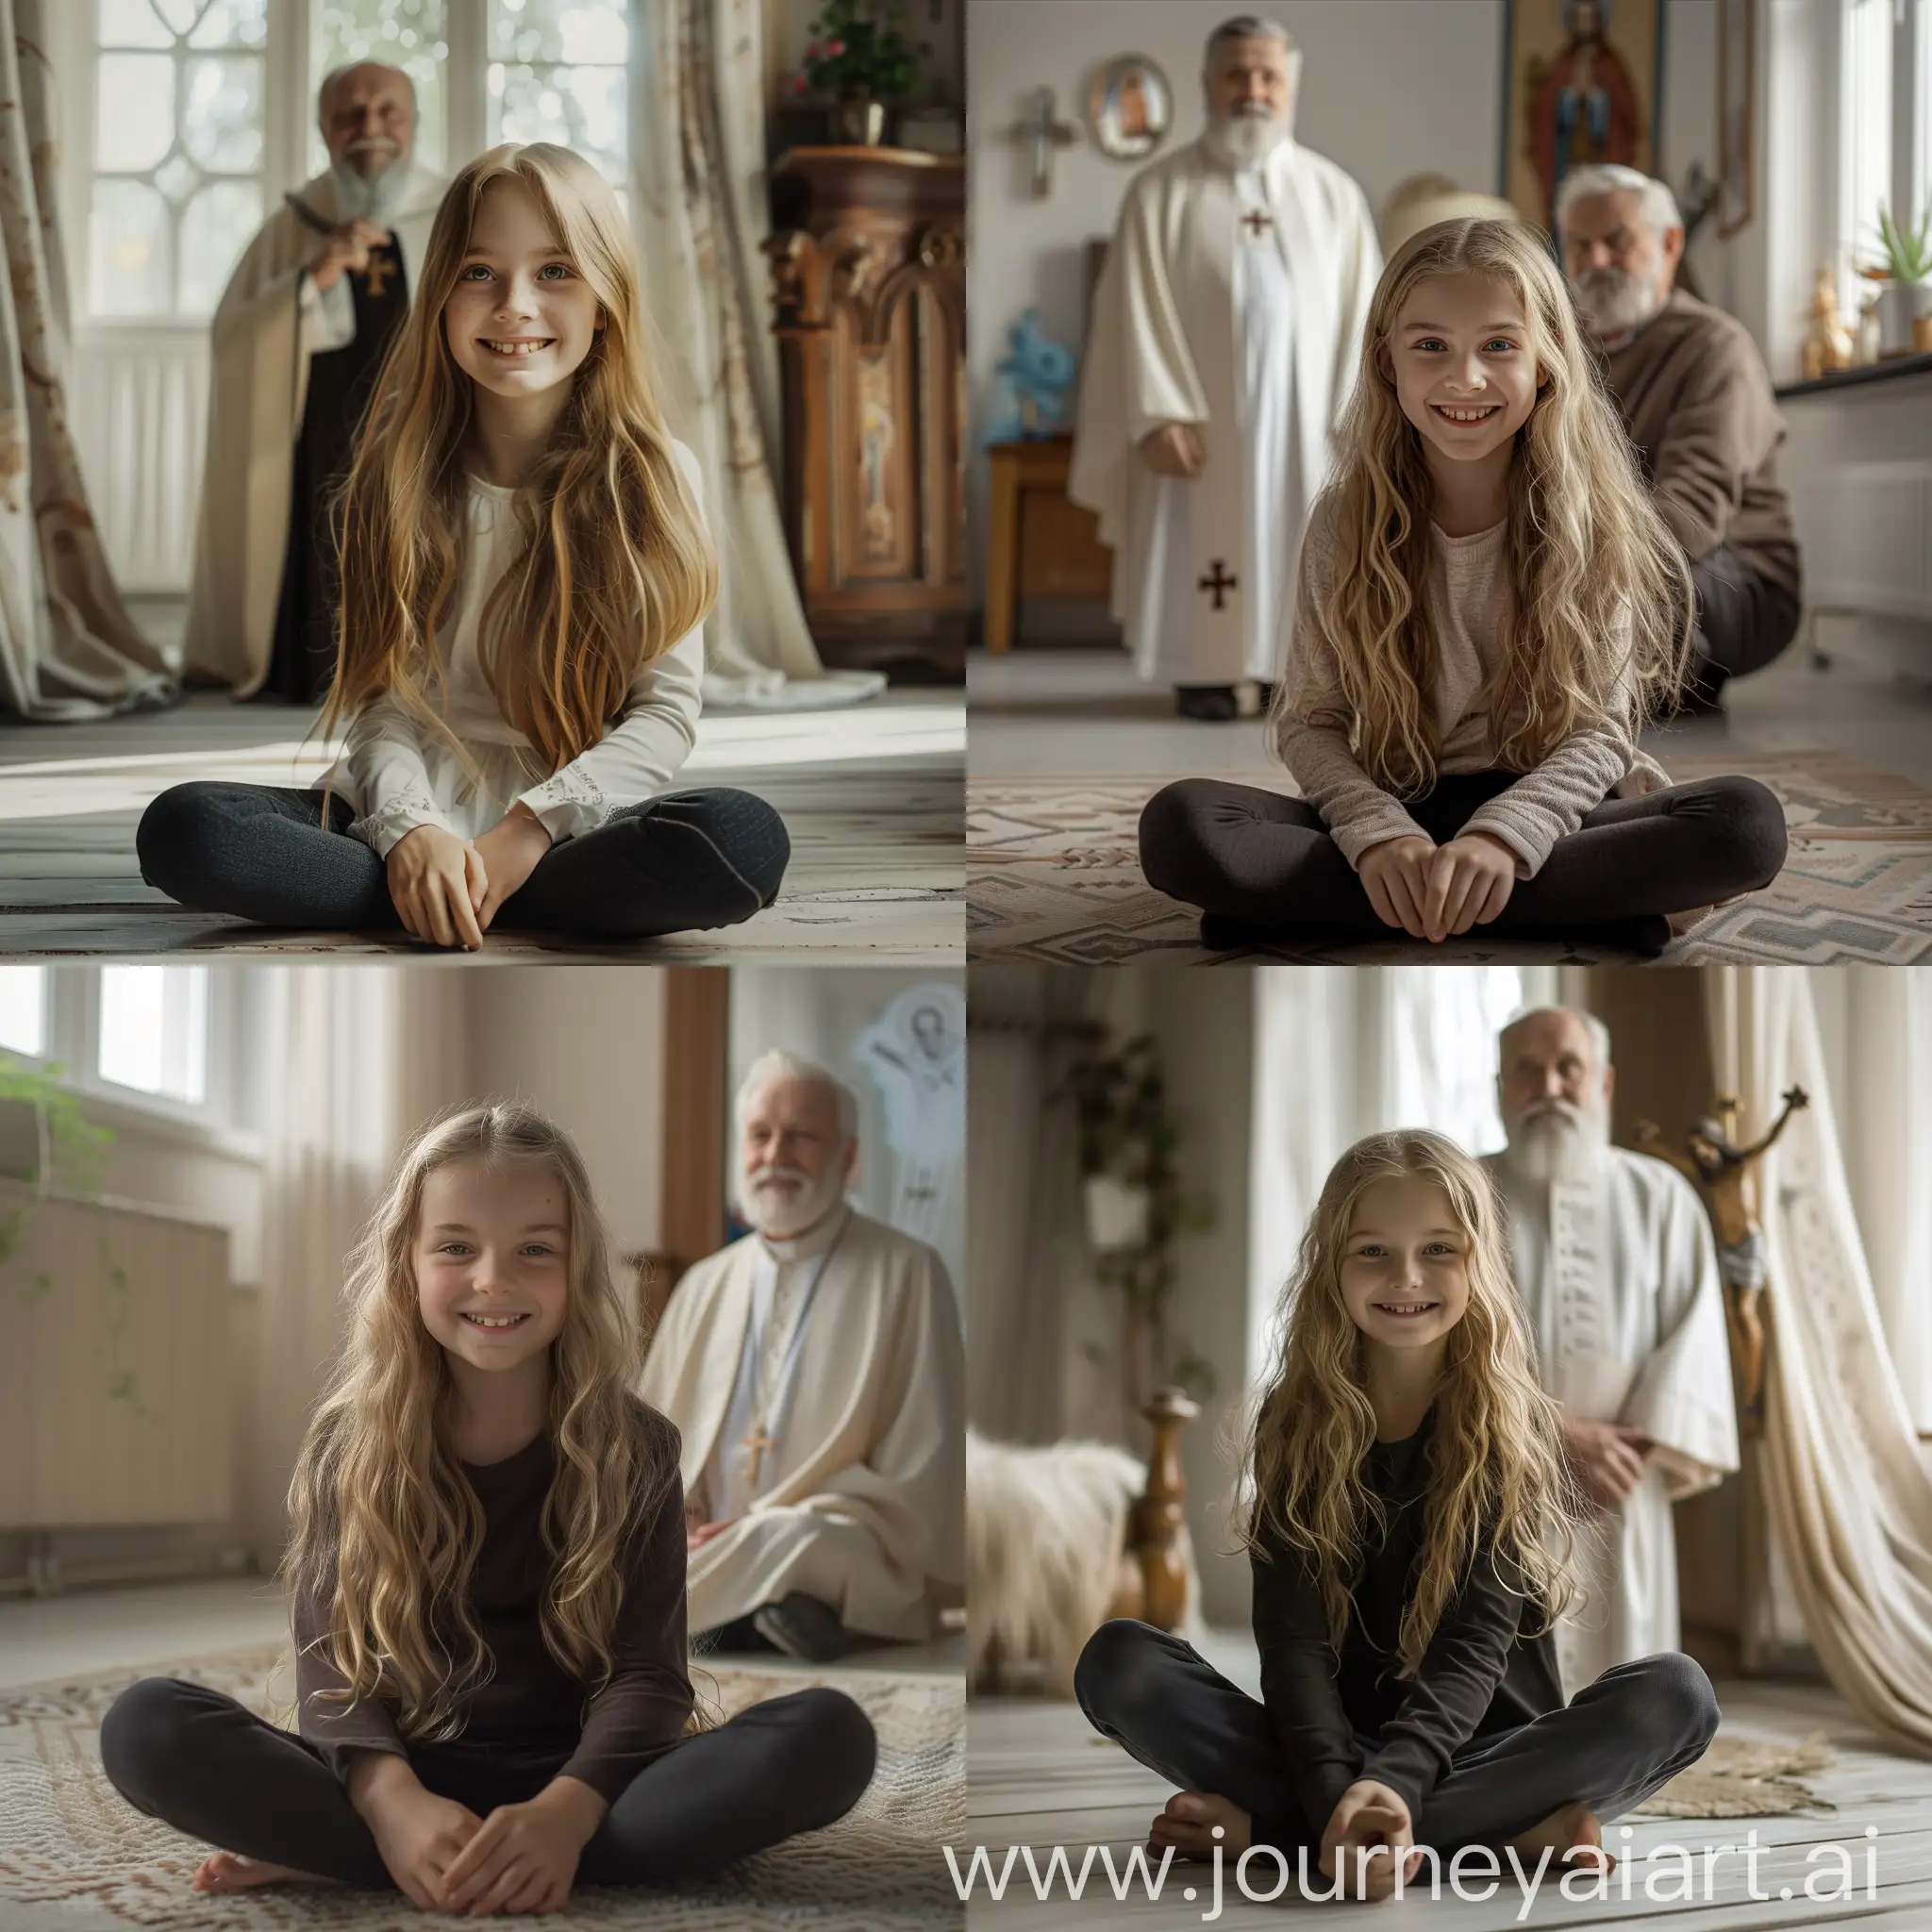 Smiling-12YearOld-Girl-with-Long-Blond-Hair-in-Bright-Room-with-Catholic-Priest